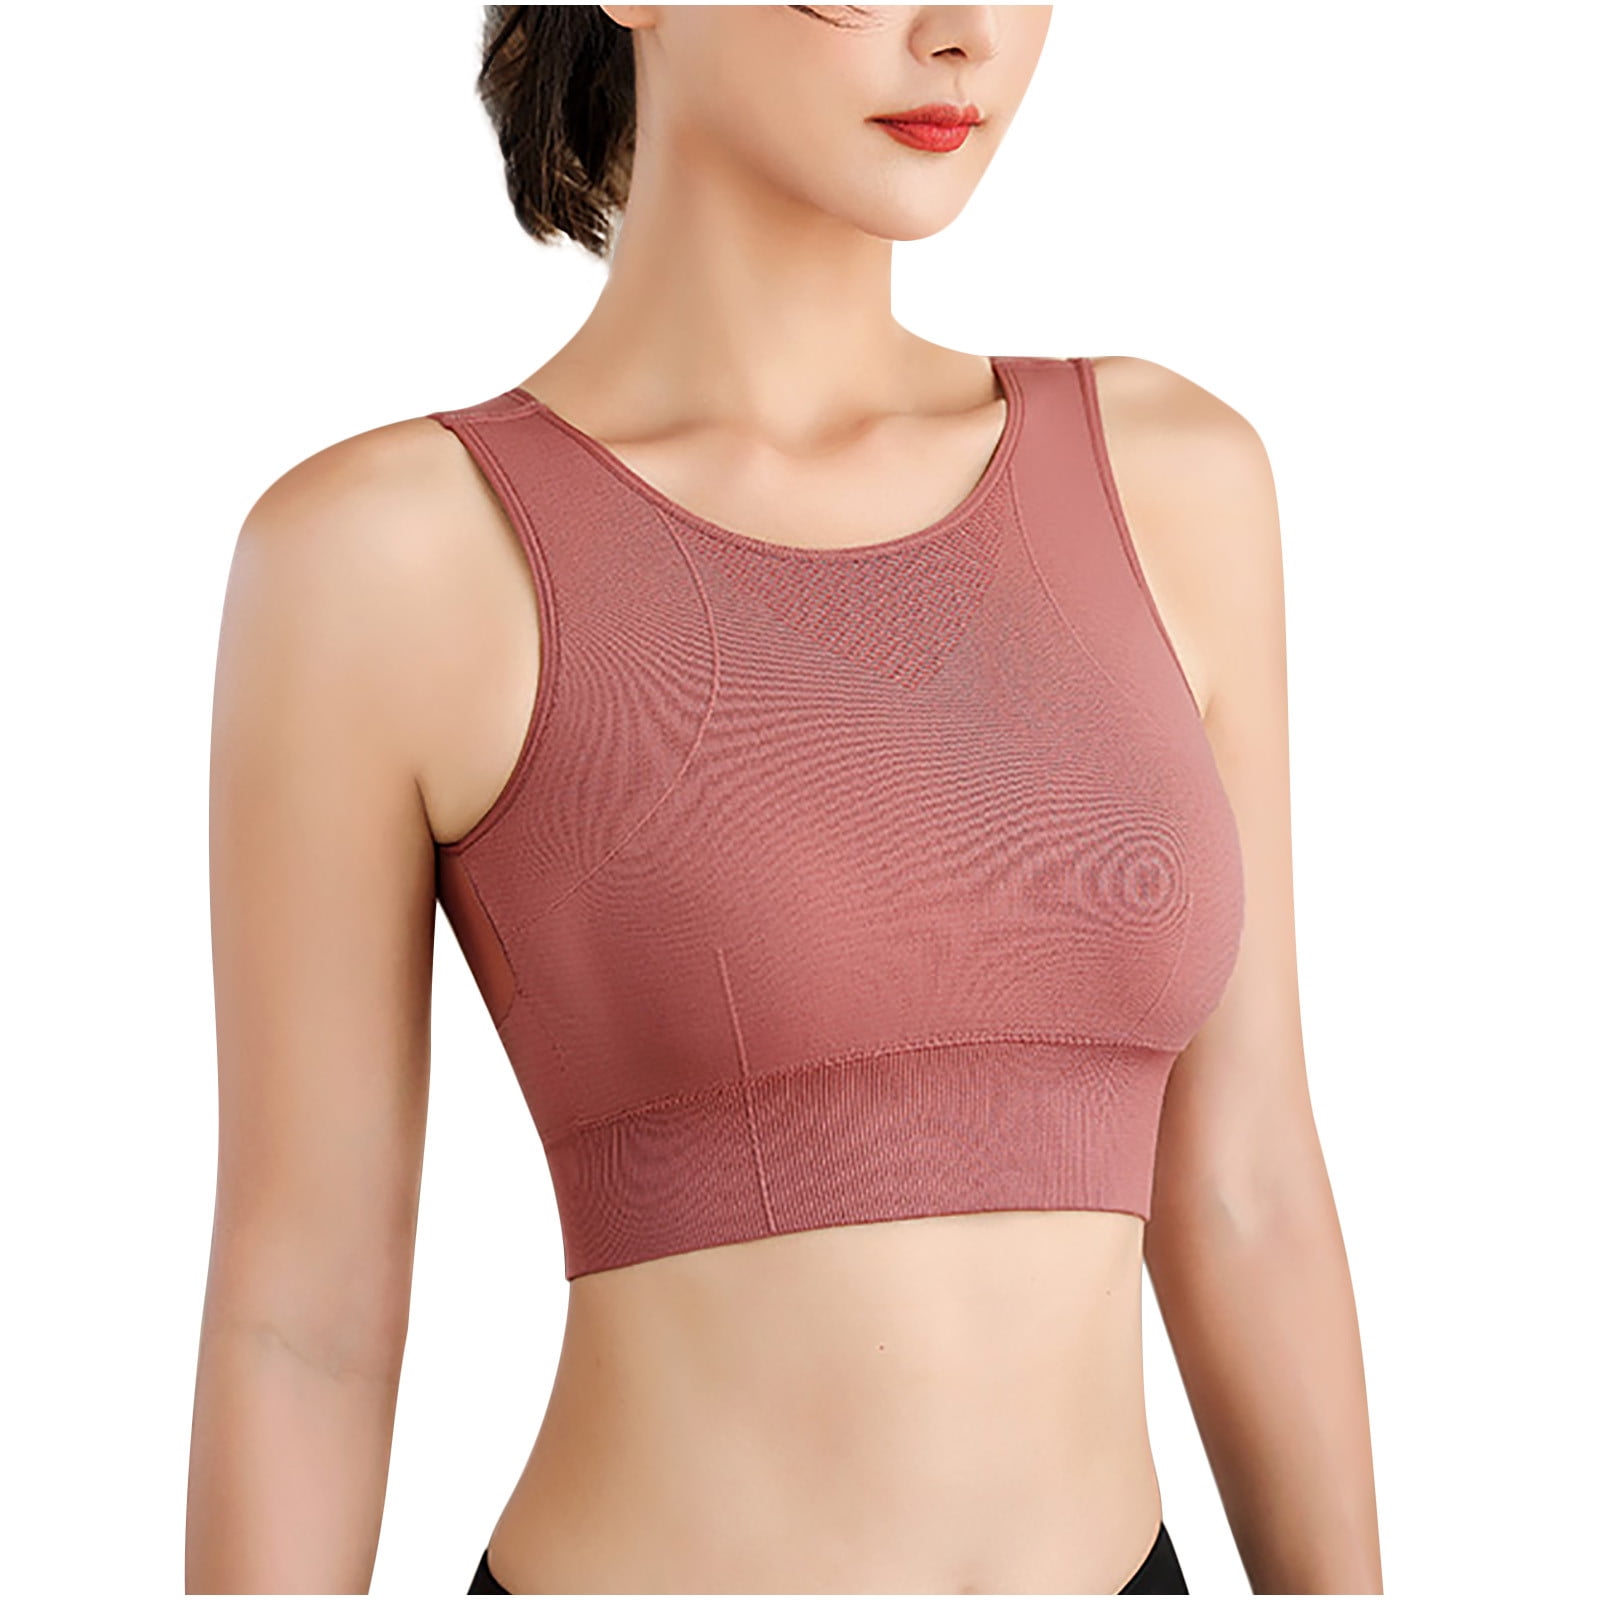 Leadmall Women Womens Sports Bra Sports Bras Ladies Yoga Solid Sleeveless  Cold Shoulder Casual Tanks Blouse Tops Sport Bra Backless Bra For Large  Bust